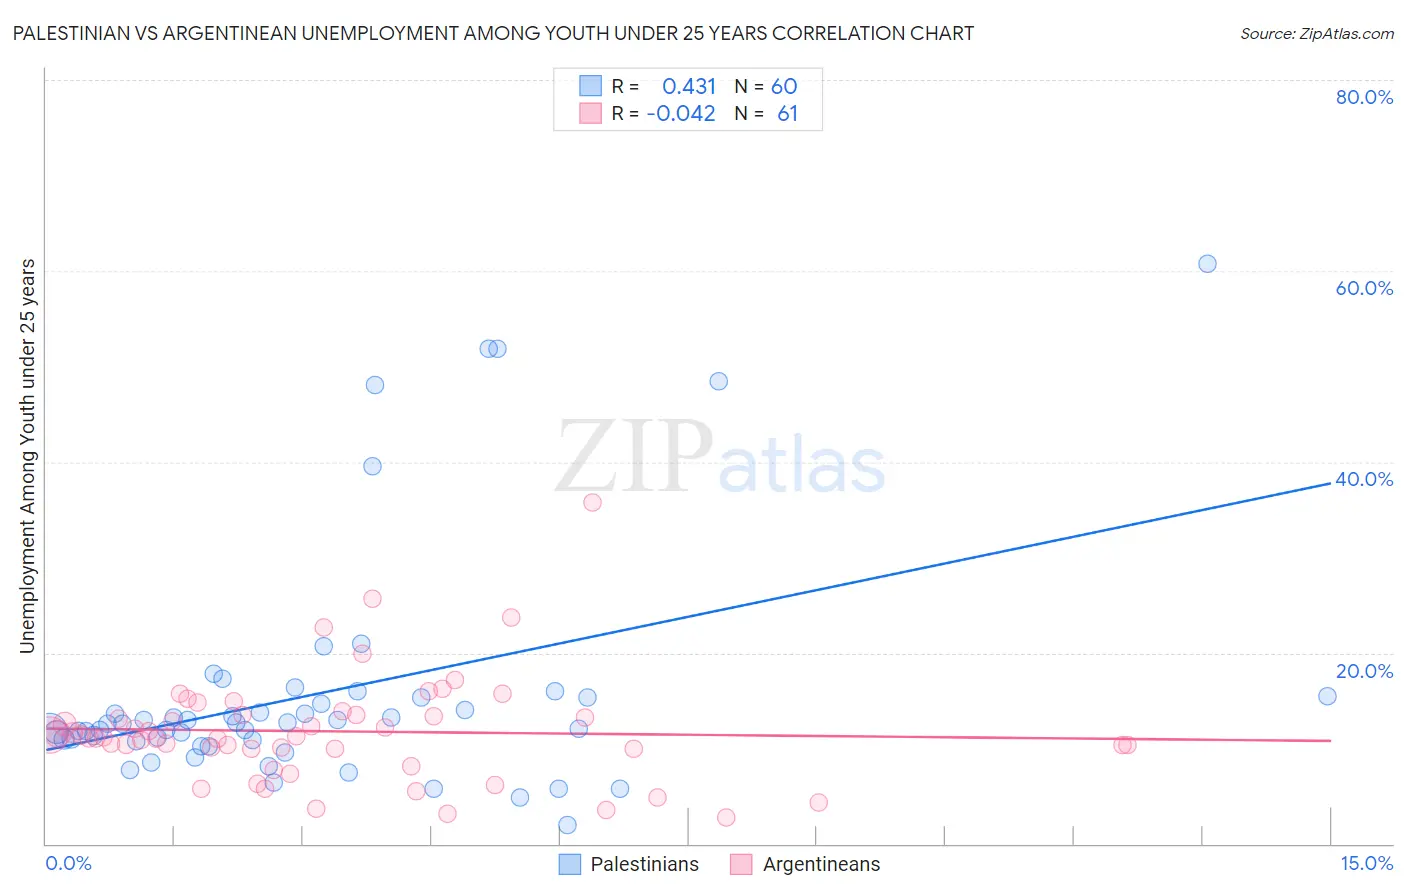 Palestinian vs Argentinean Unemployment Among Youth under 25 years